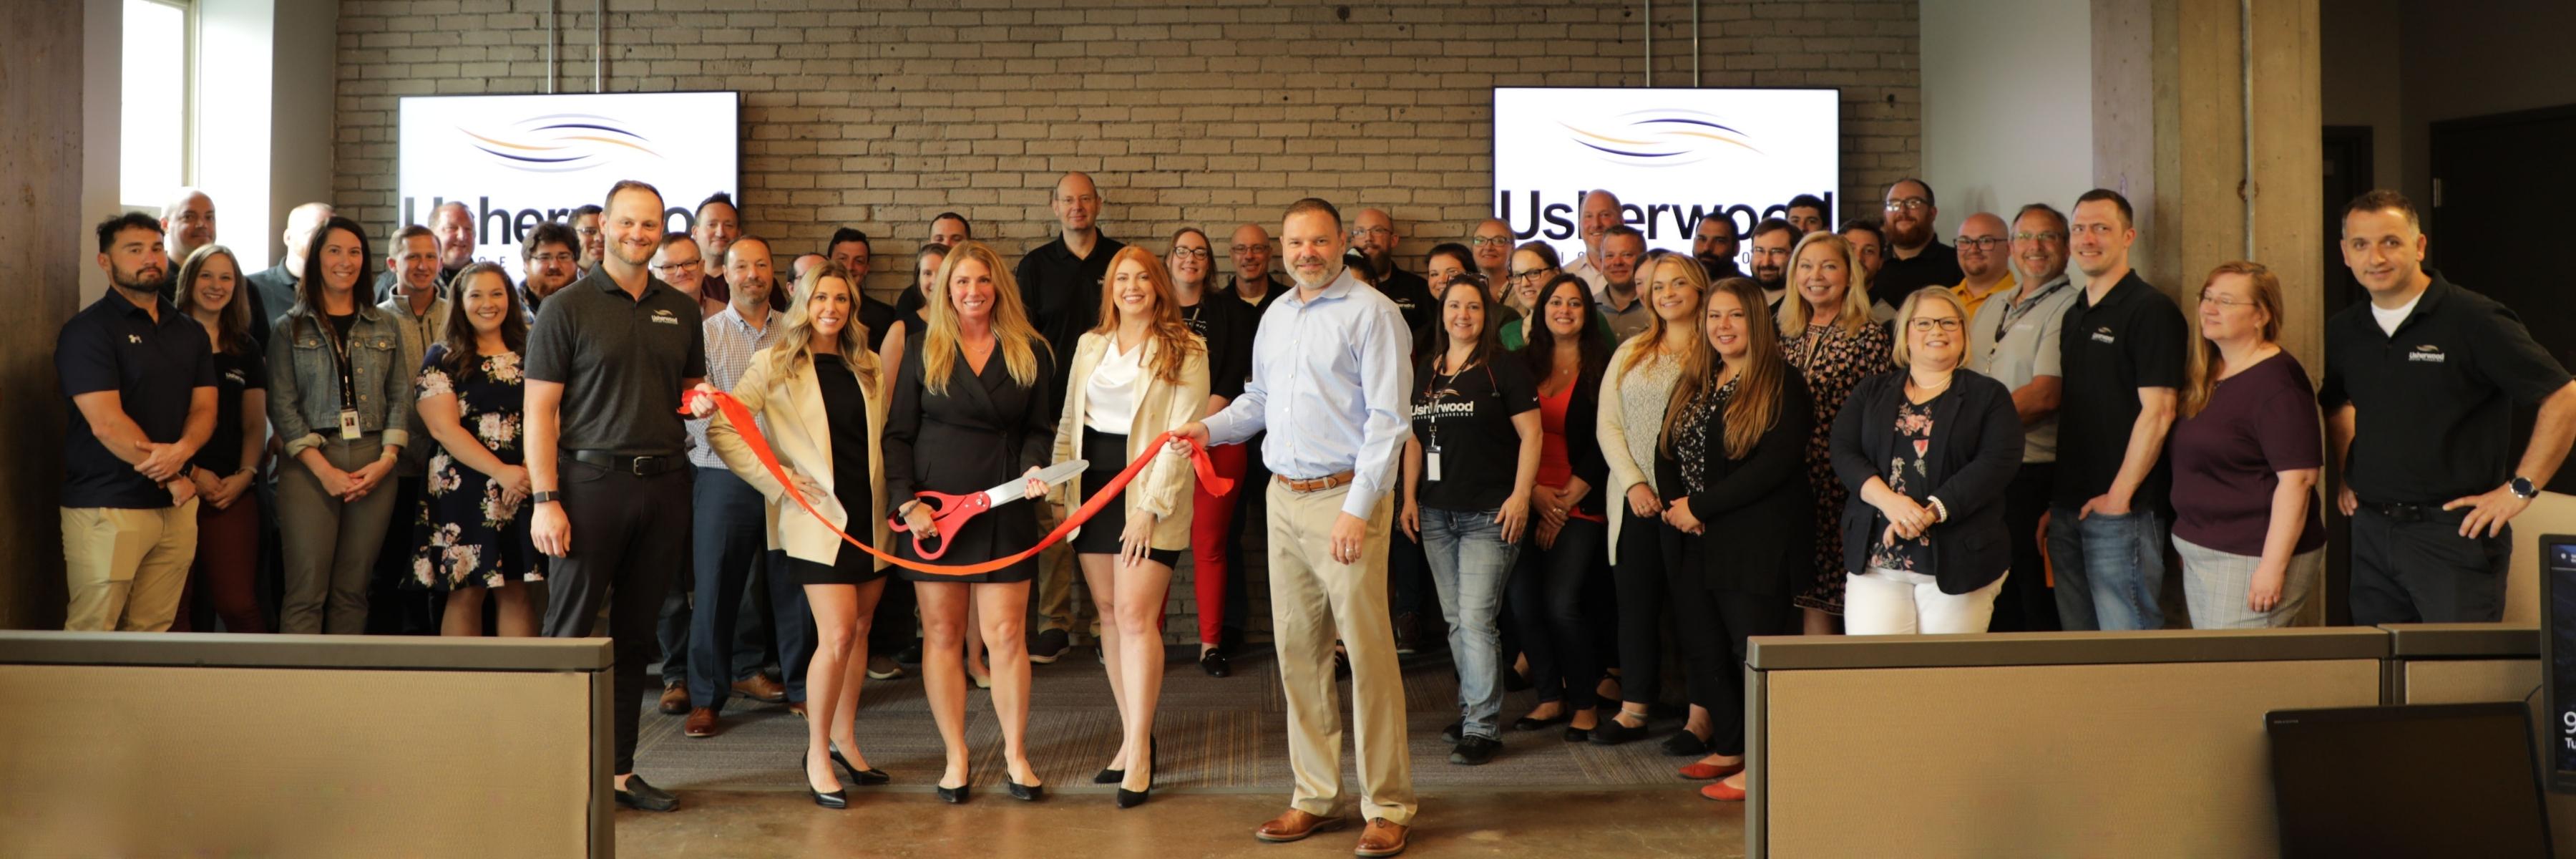 Usherwood Expands Syracuse Office Space with New Collaborative Work Environment